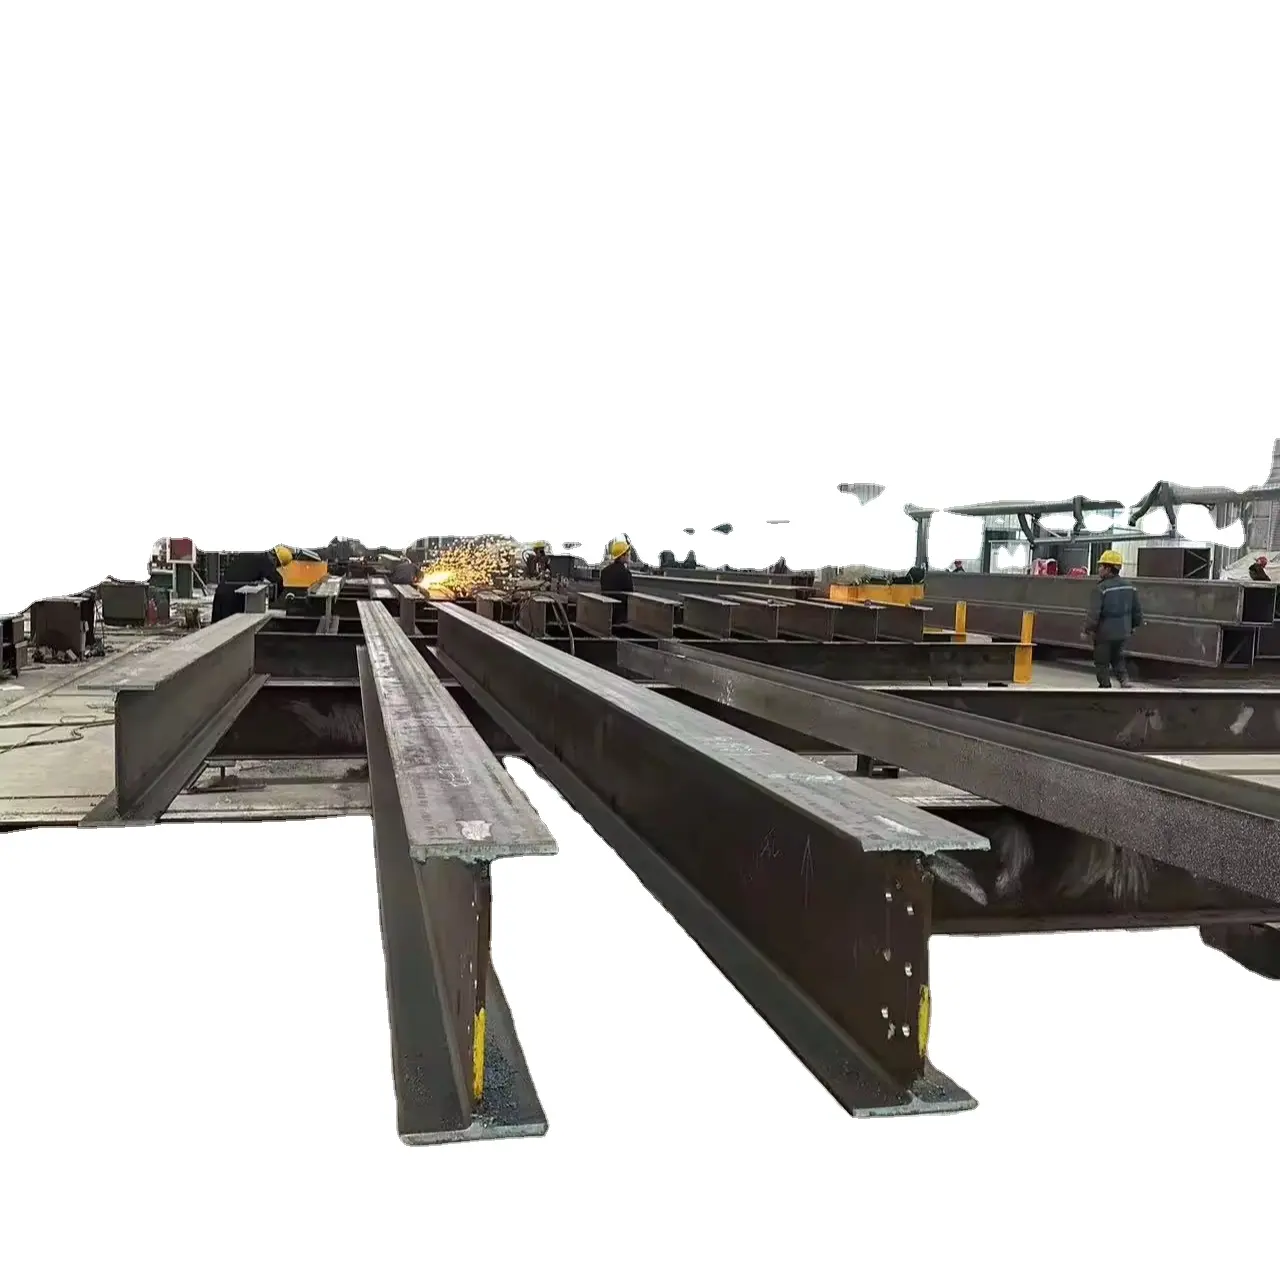 Large span purlins and pillars for large factory buildings with steel structures